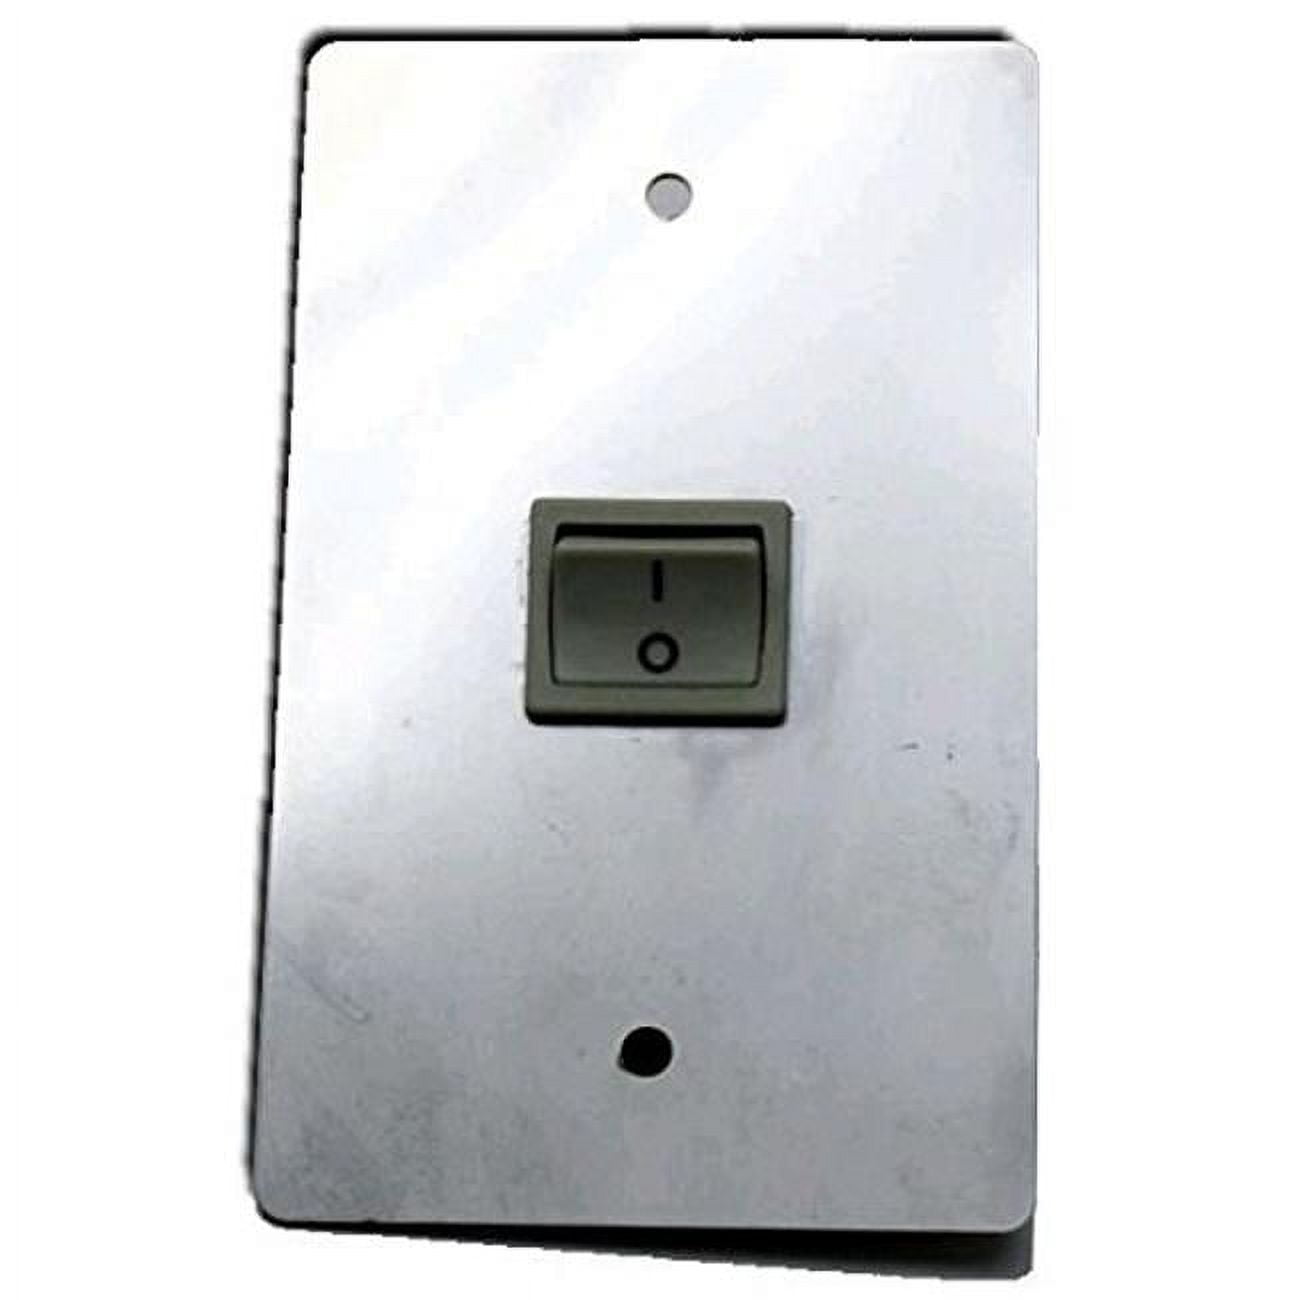 Ws38 Wall Plate Switch